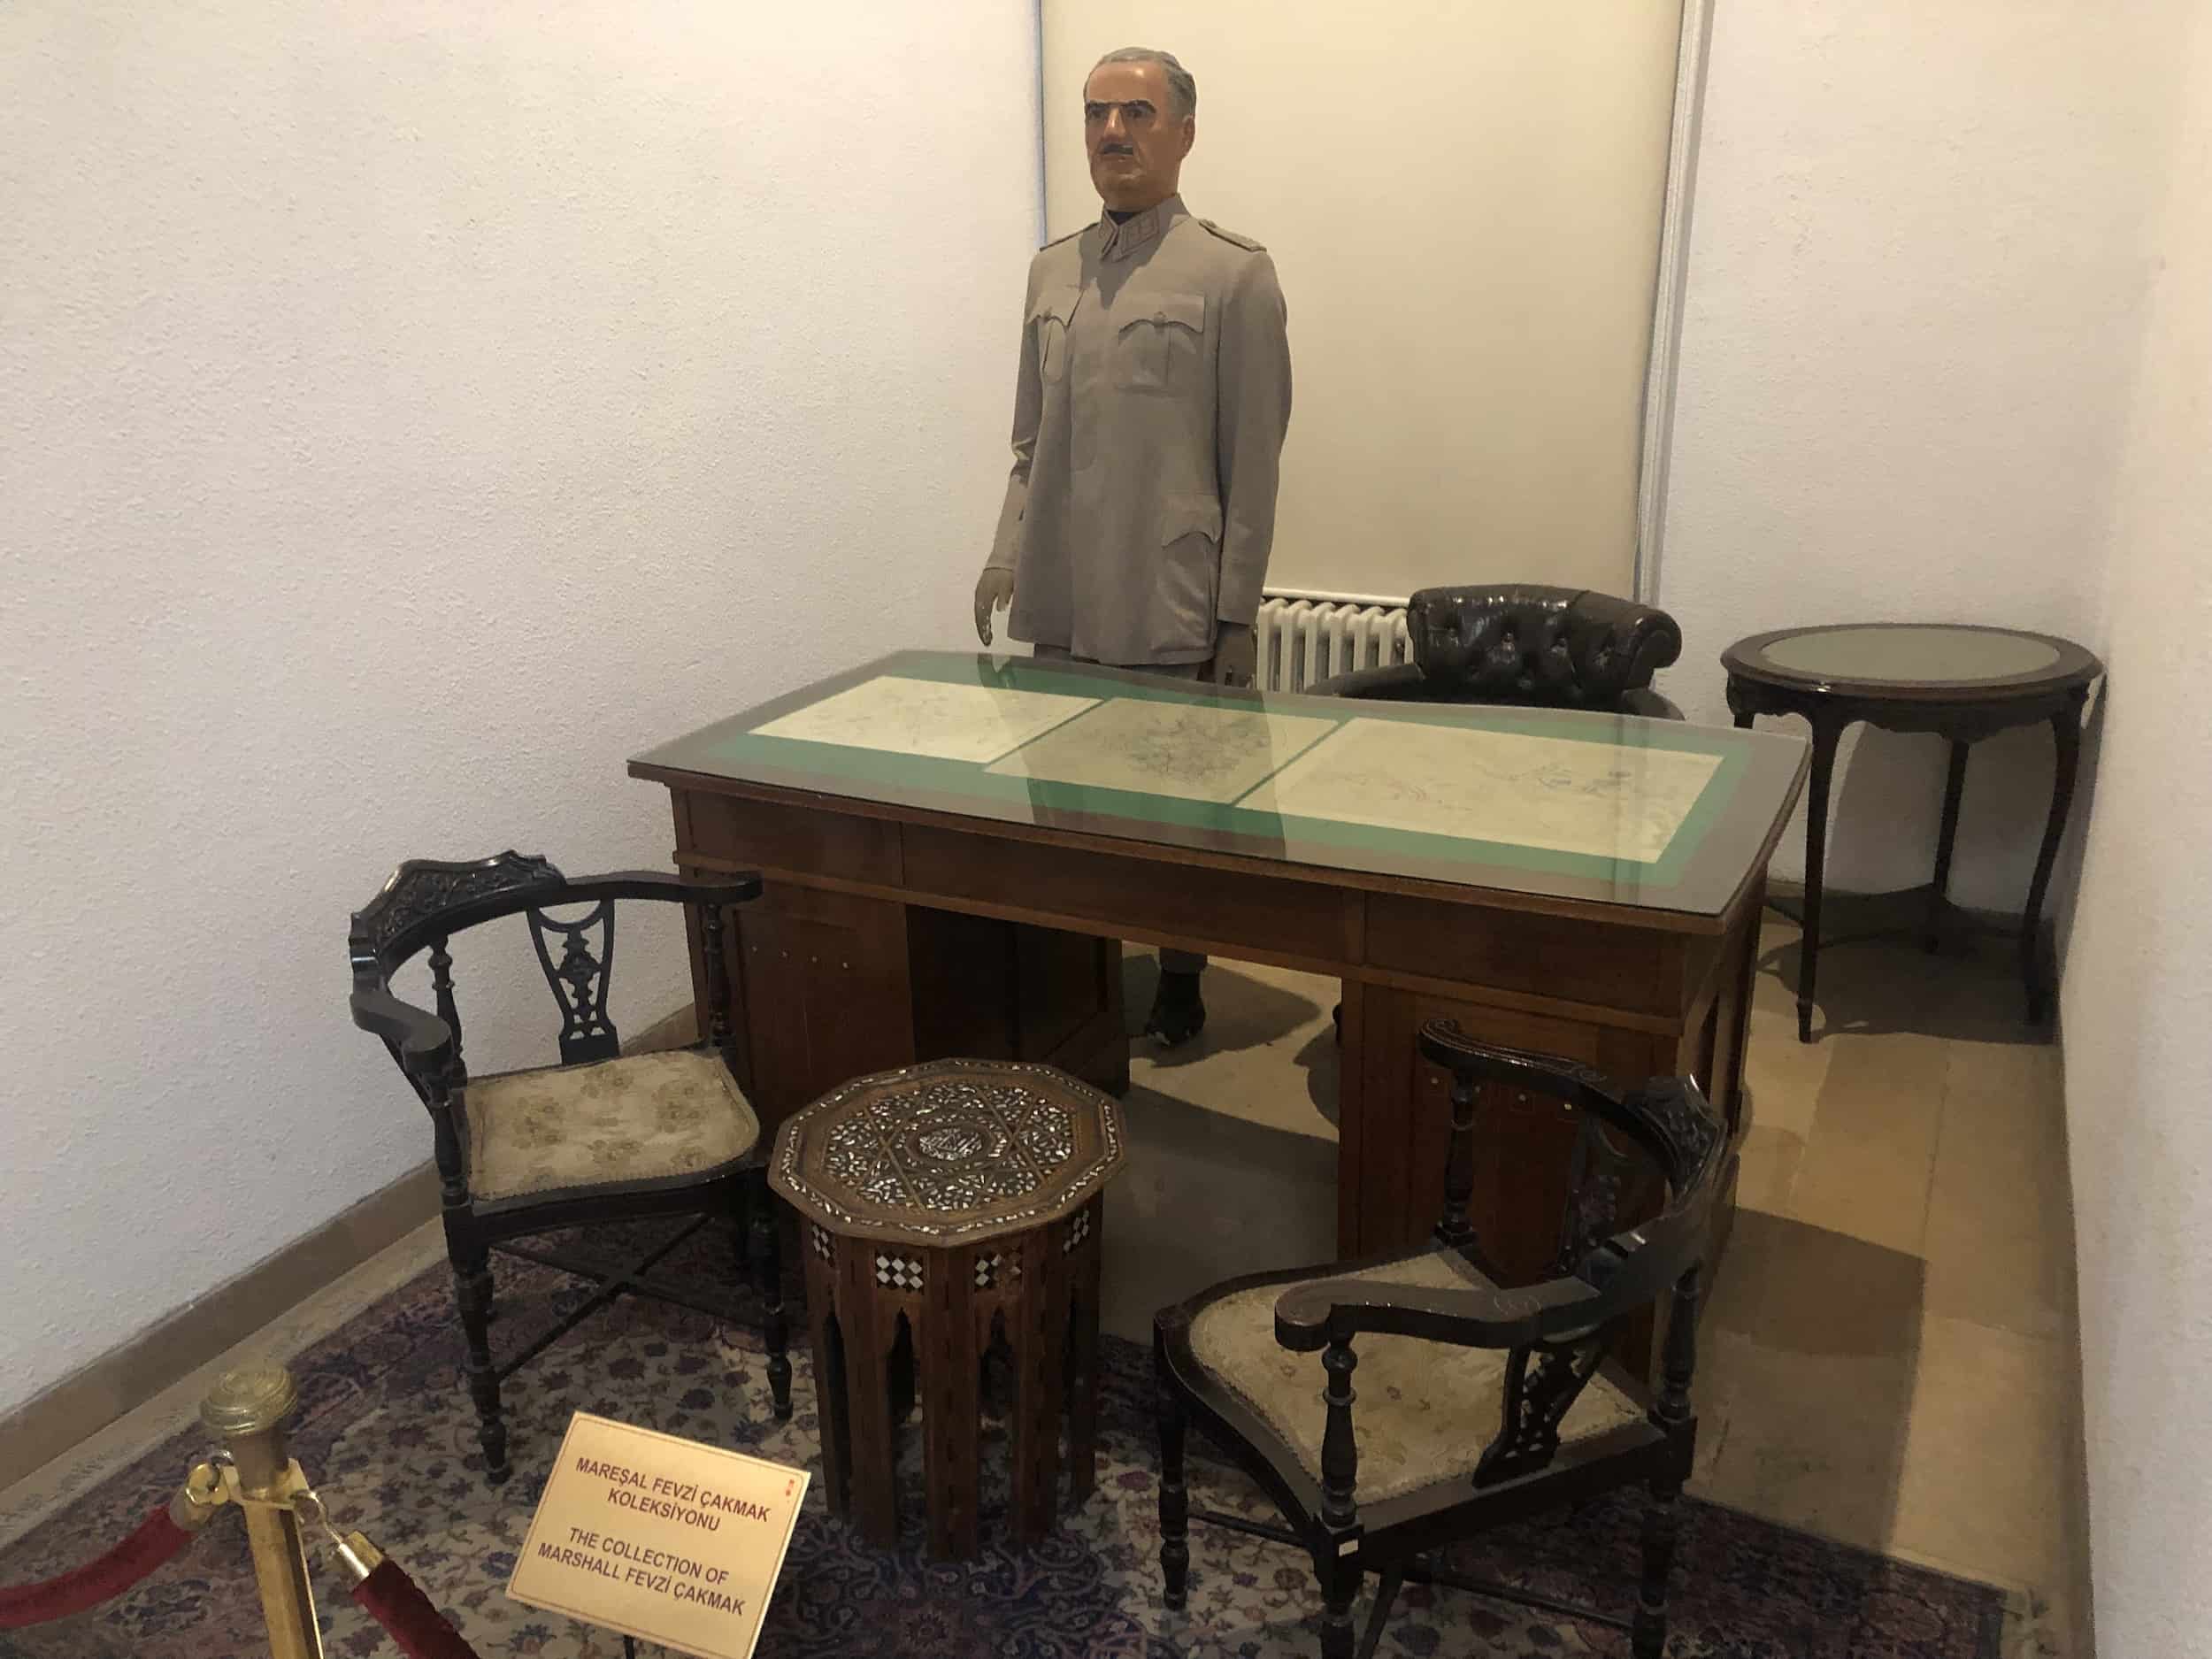 Fevzi Çakmak in the War of Independence Hall at the Harbiye Military Museum in Istanbul, Turkey